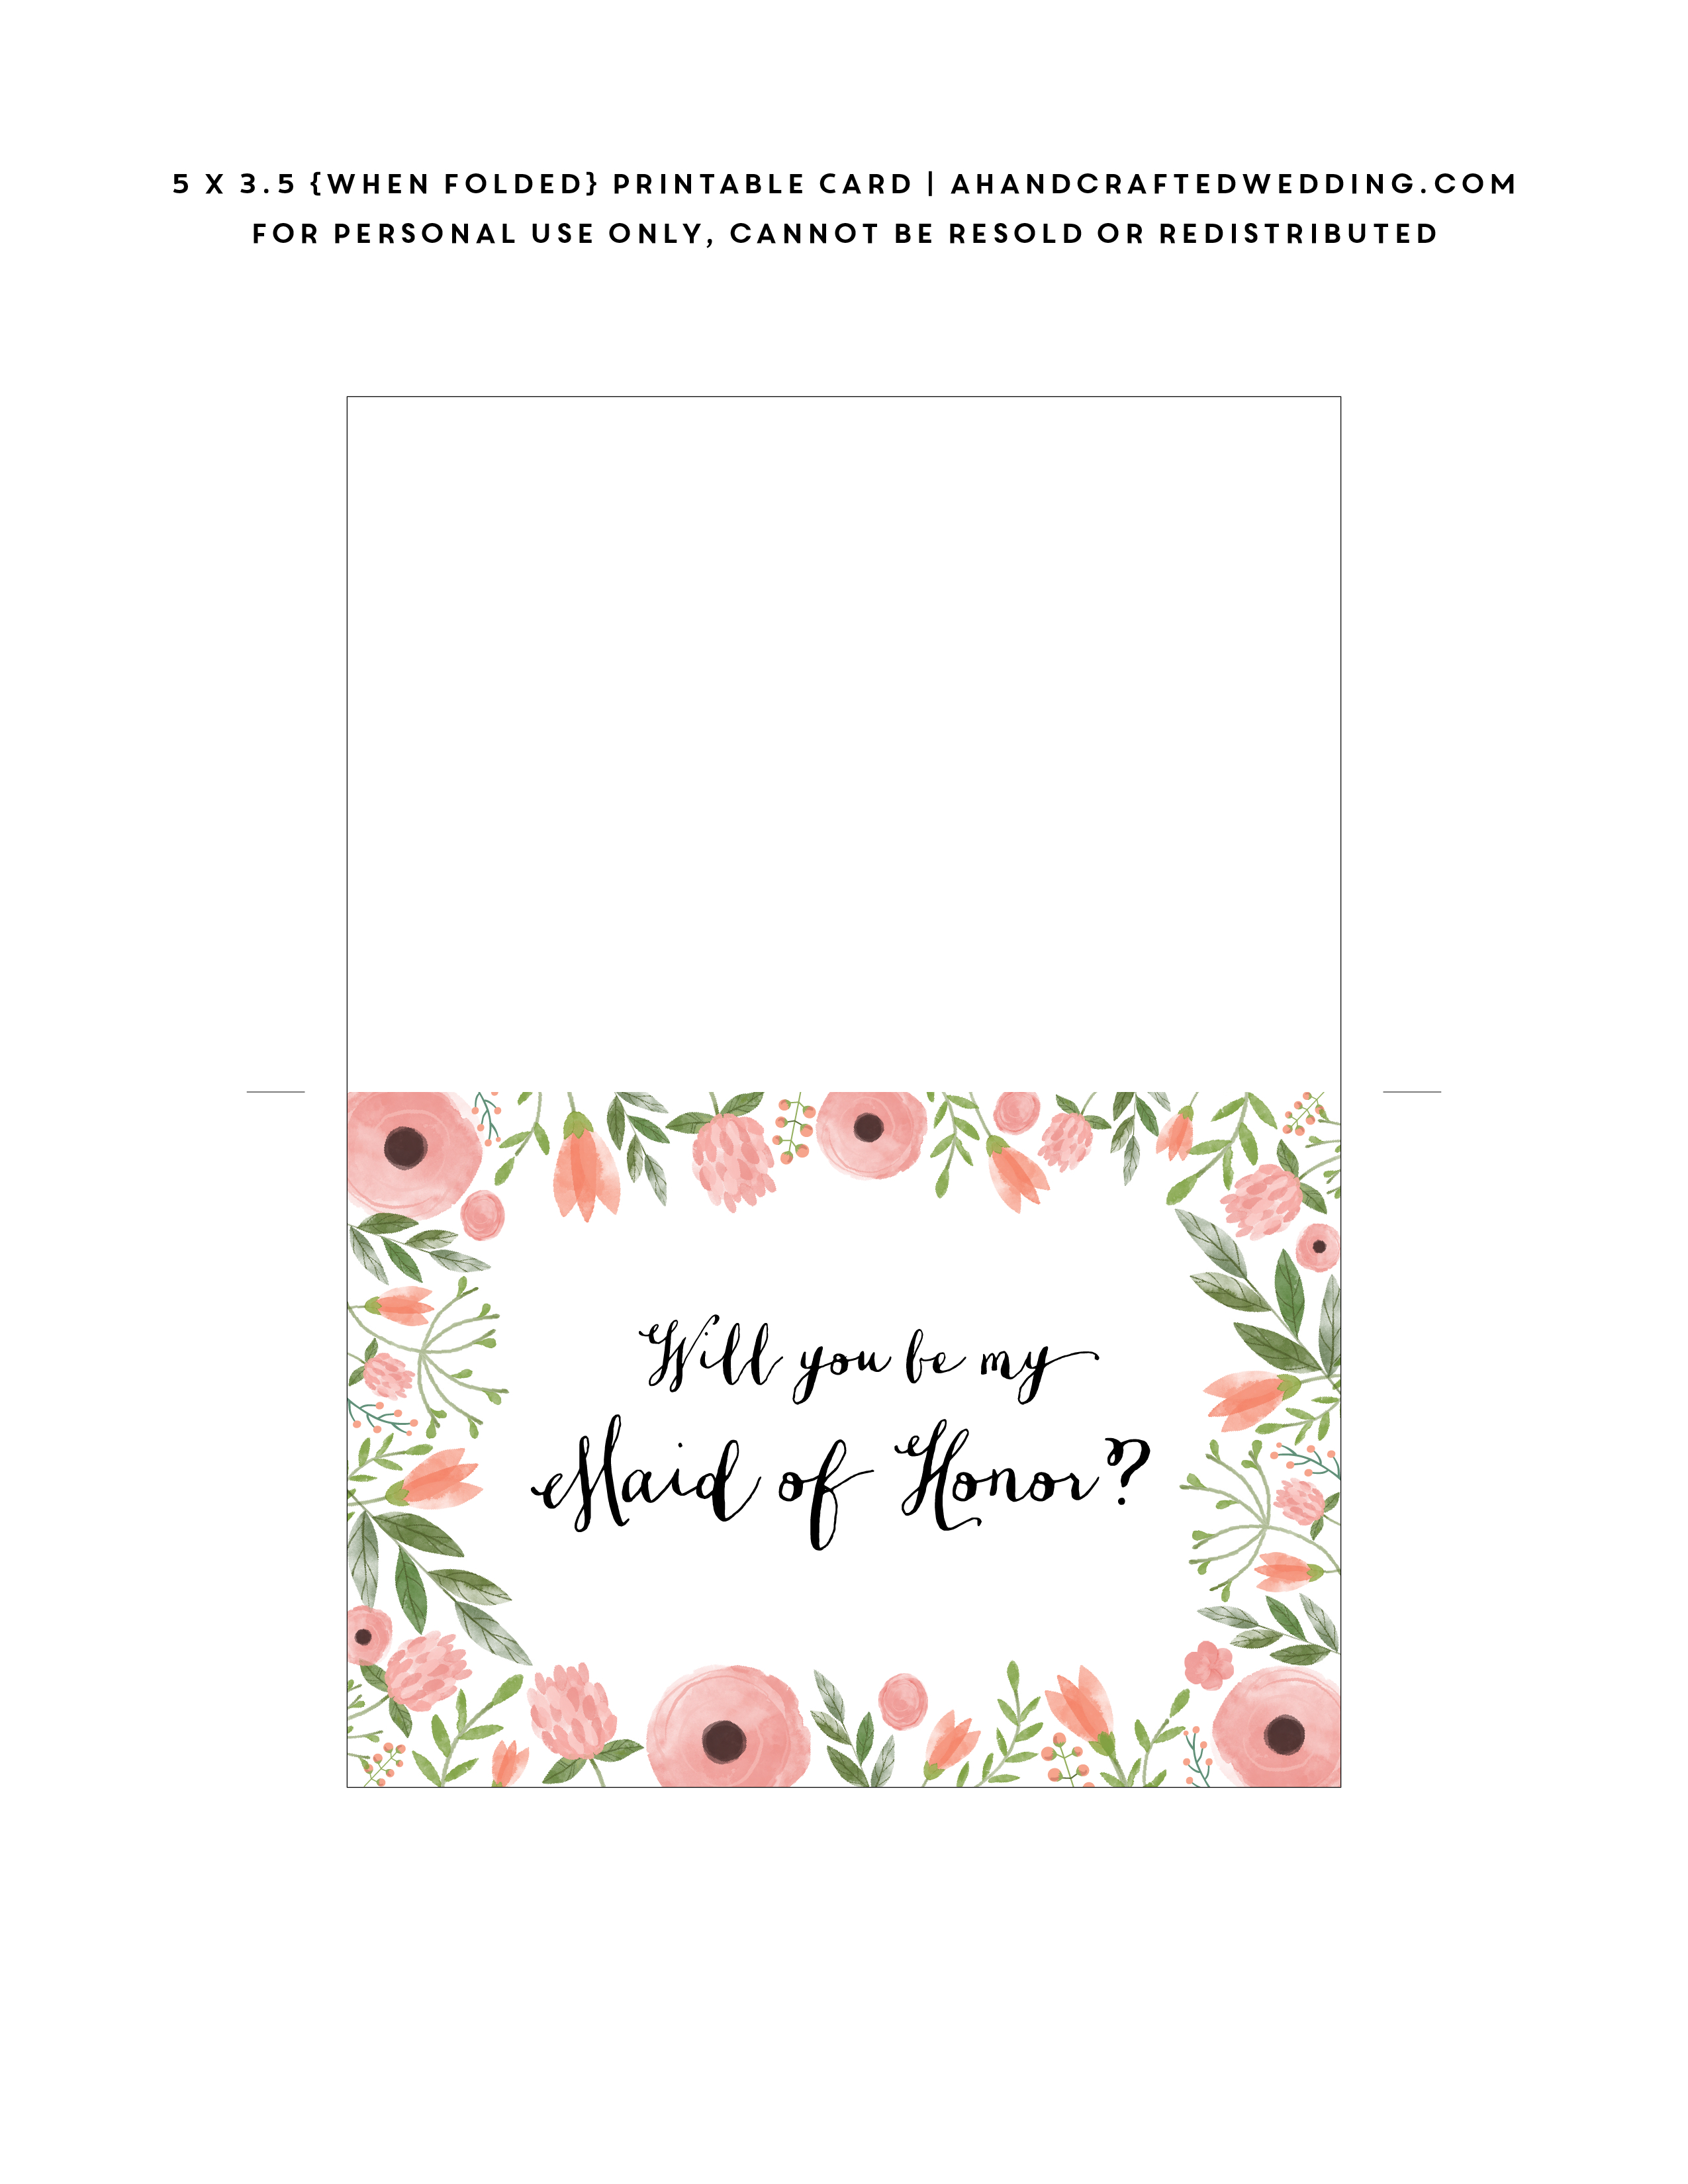 Pincandace Starr On Bridal Party | Bridesmaid Cards, Be My - Free Printable Will You Be My Maid Of Honor Card